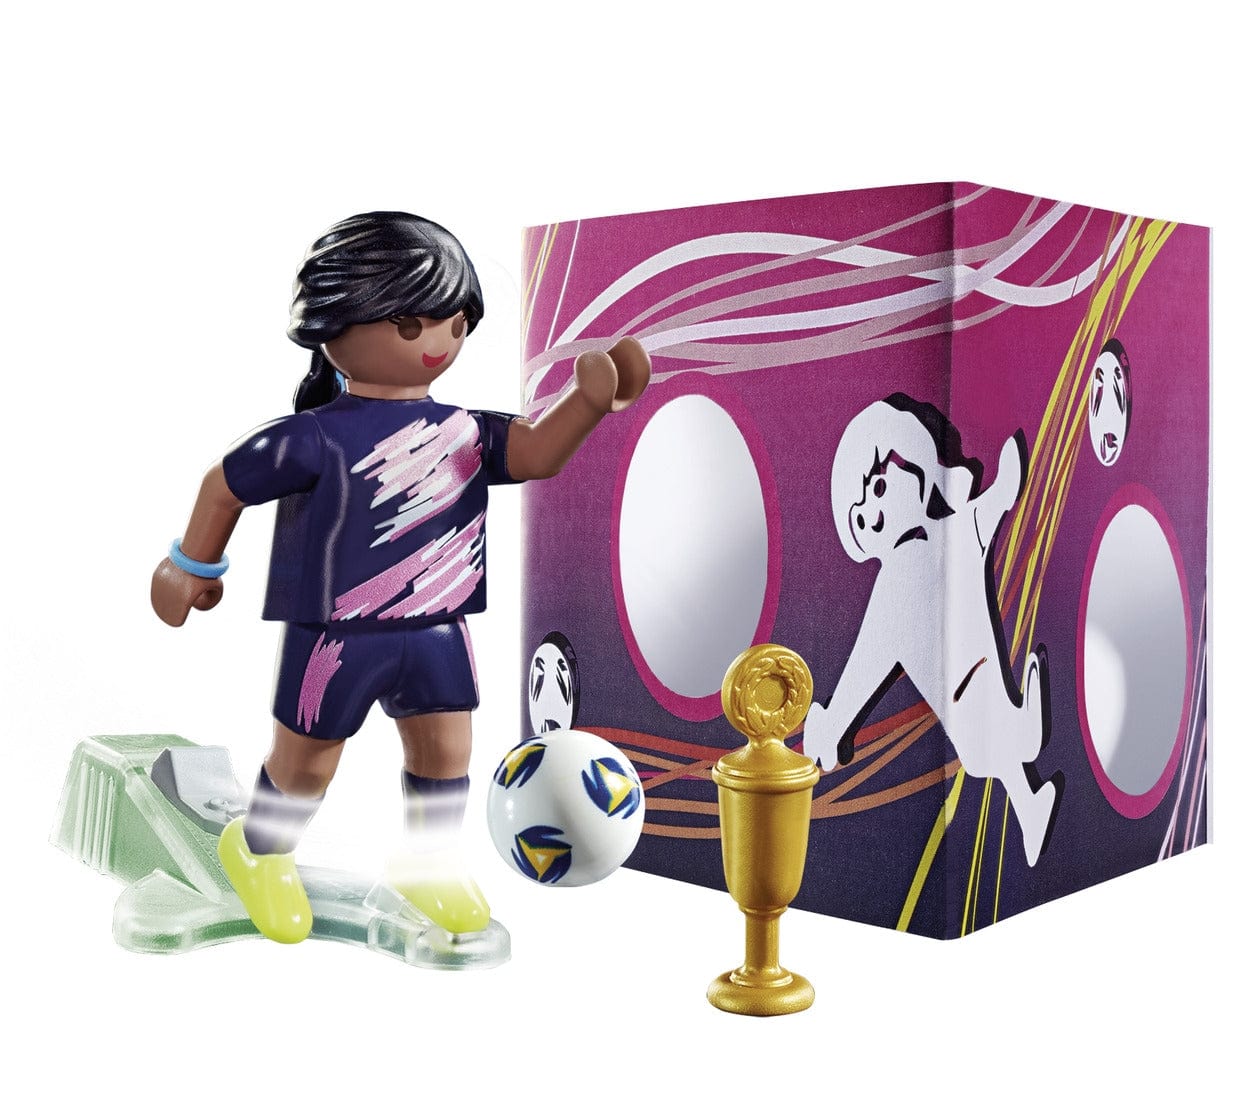 Soccer Player with Goal Playmobil Lil Tulips